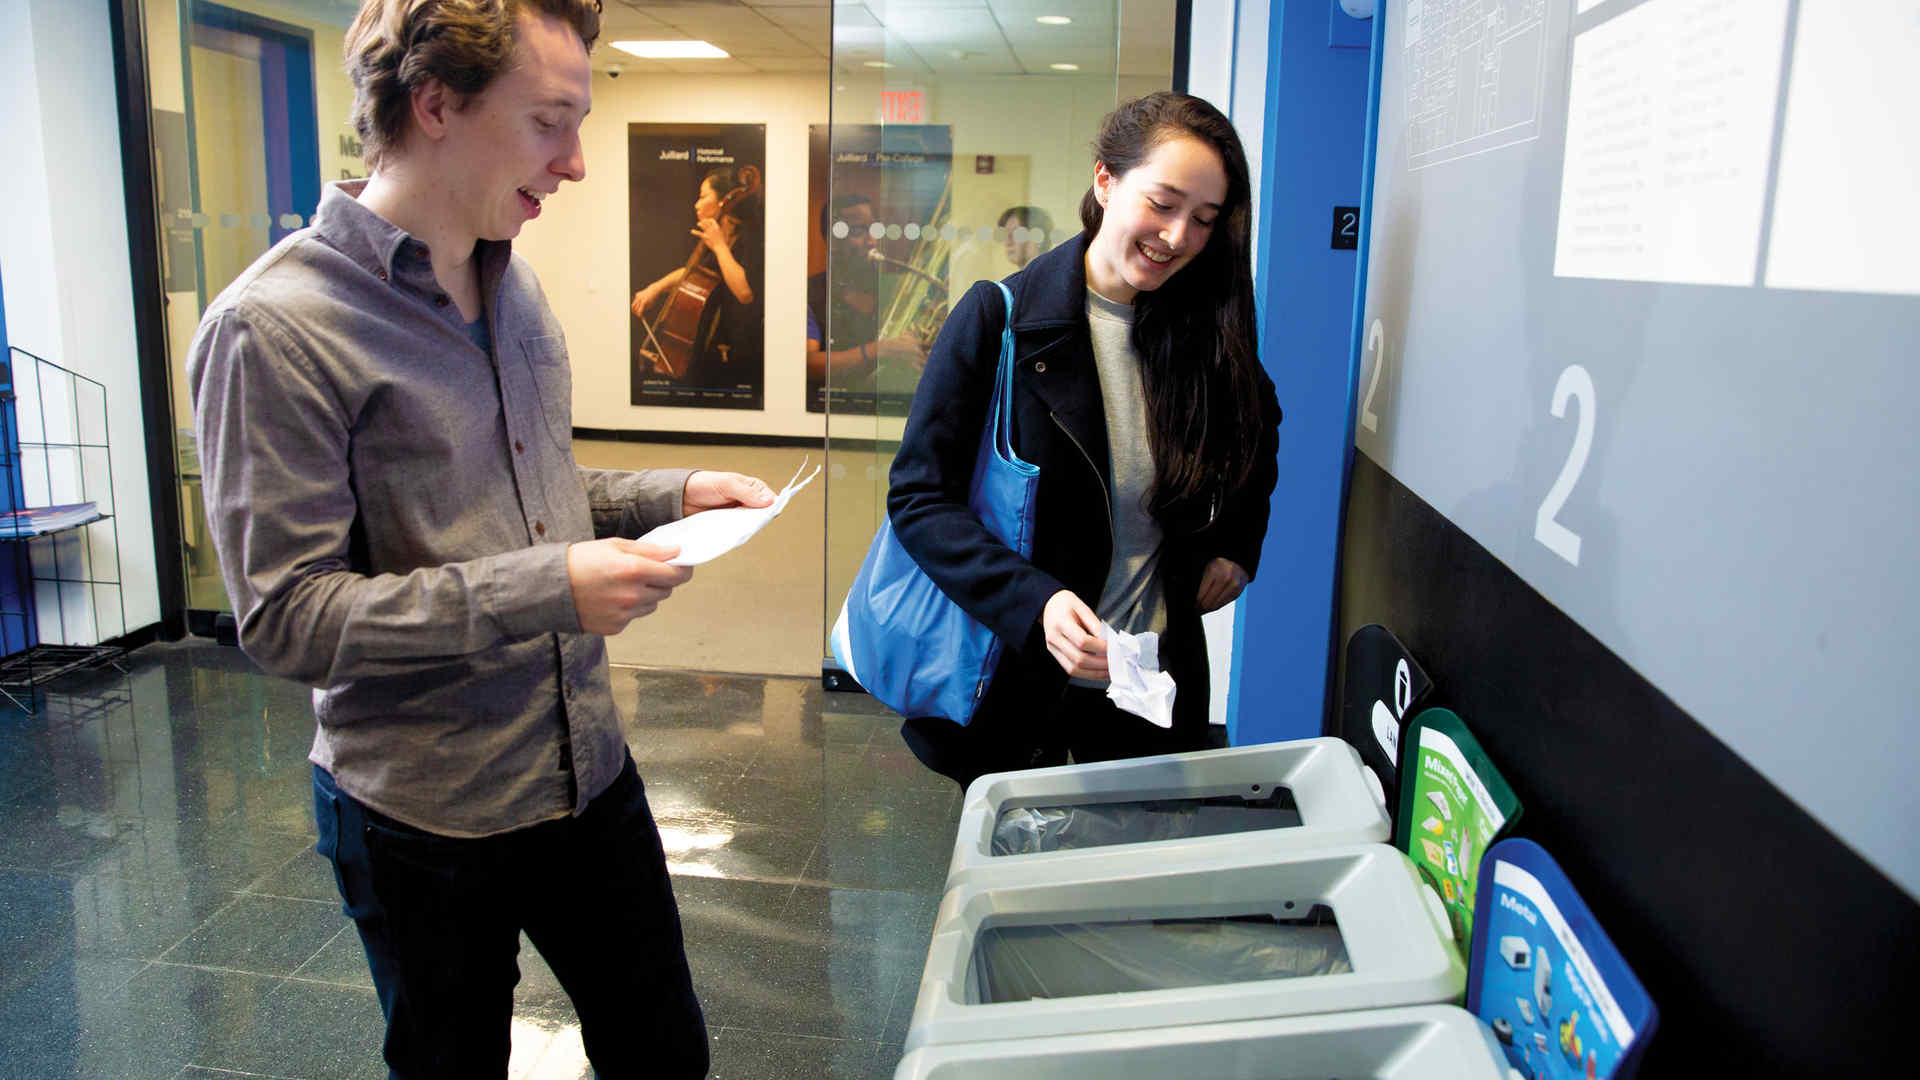 Students Ben Sellick and Isabella Bignasca near the trash and recycling bins